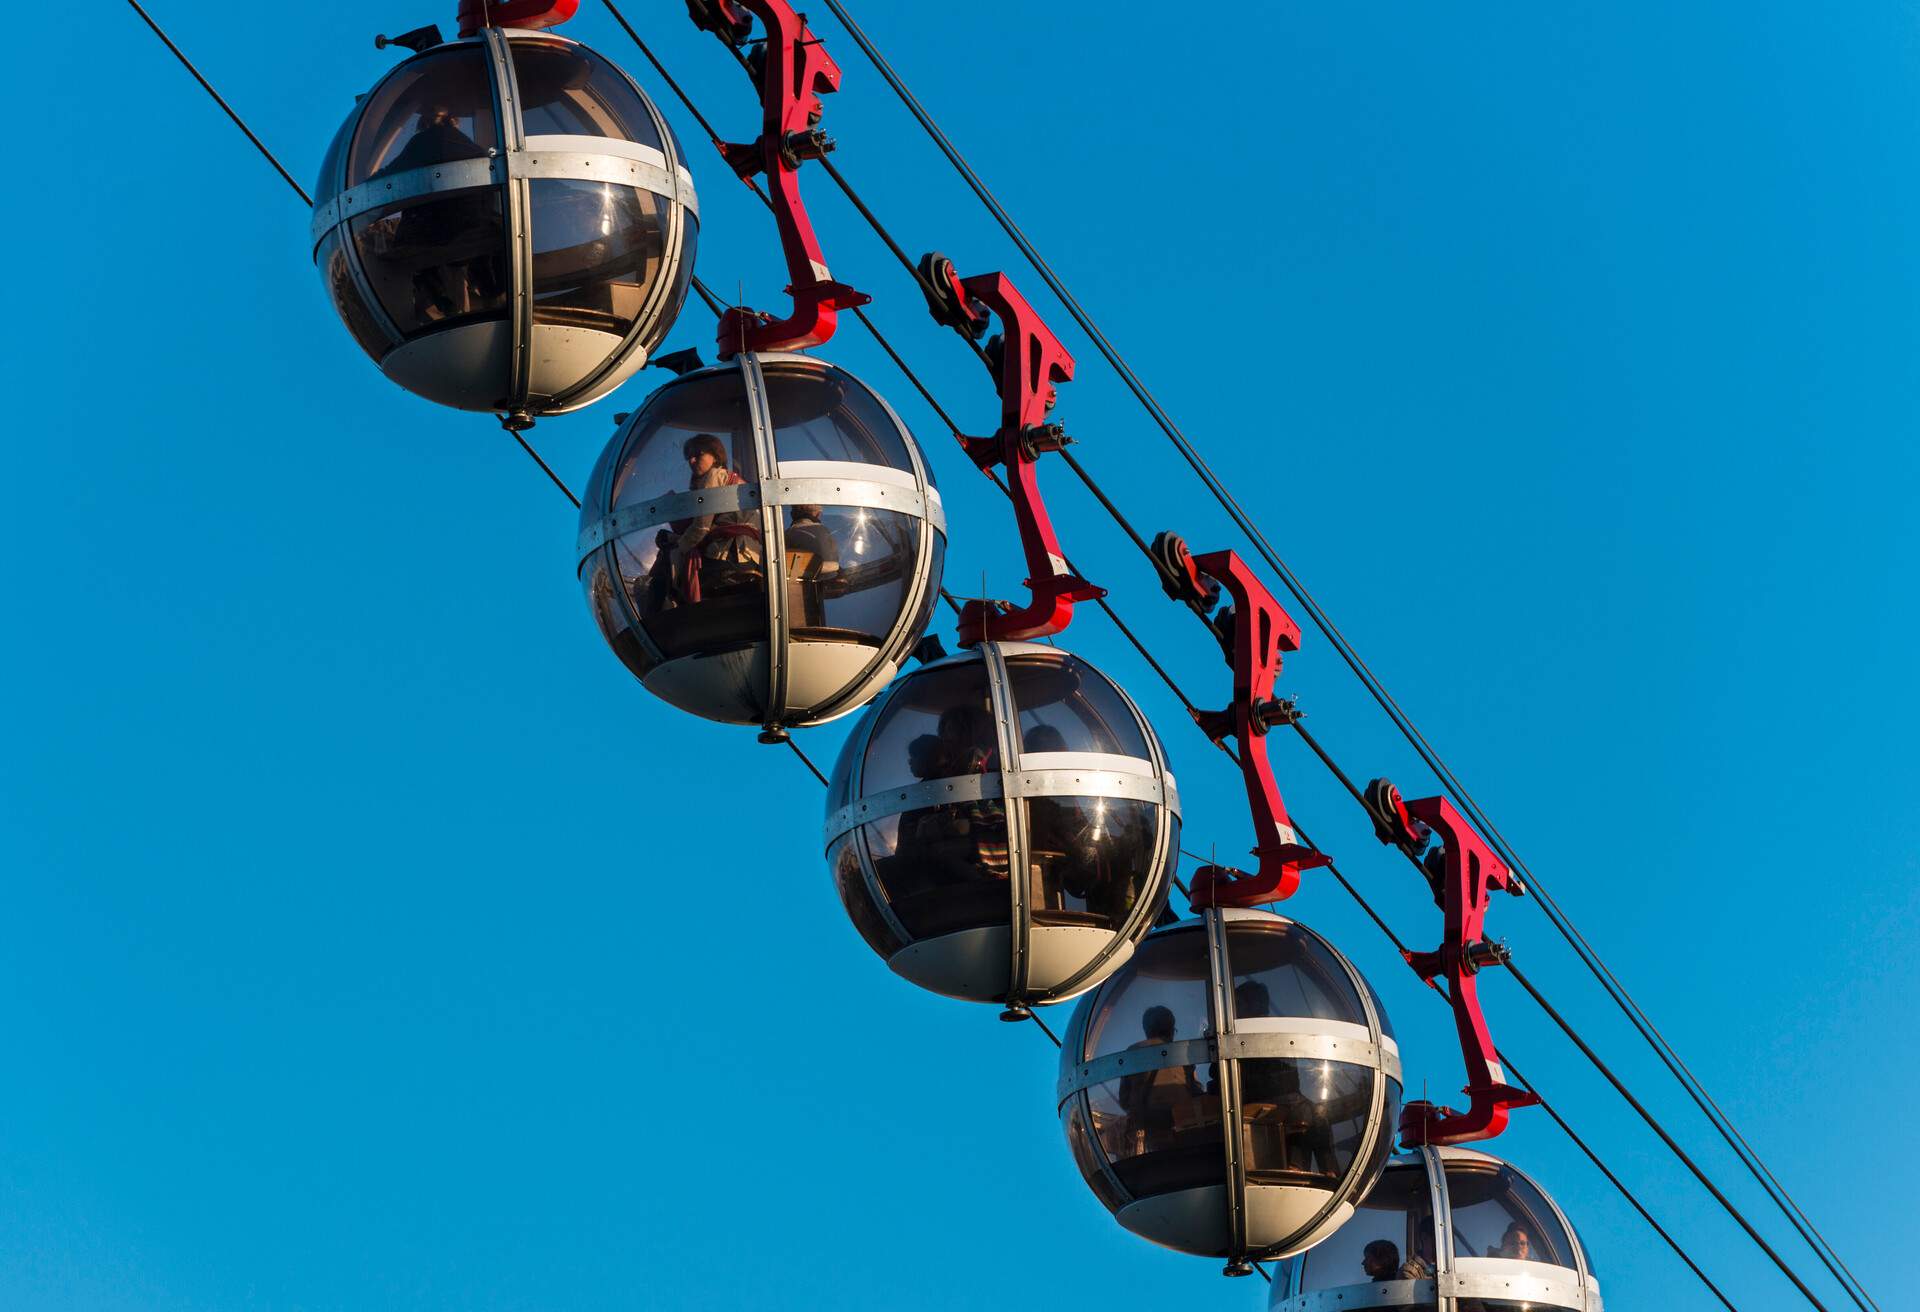 DEST_FRANCE_GRENOBLE_THEME_PEOPLE_ATTRACTION_CABLE-CAR-GettyImages-522247196